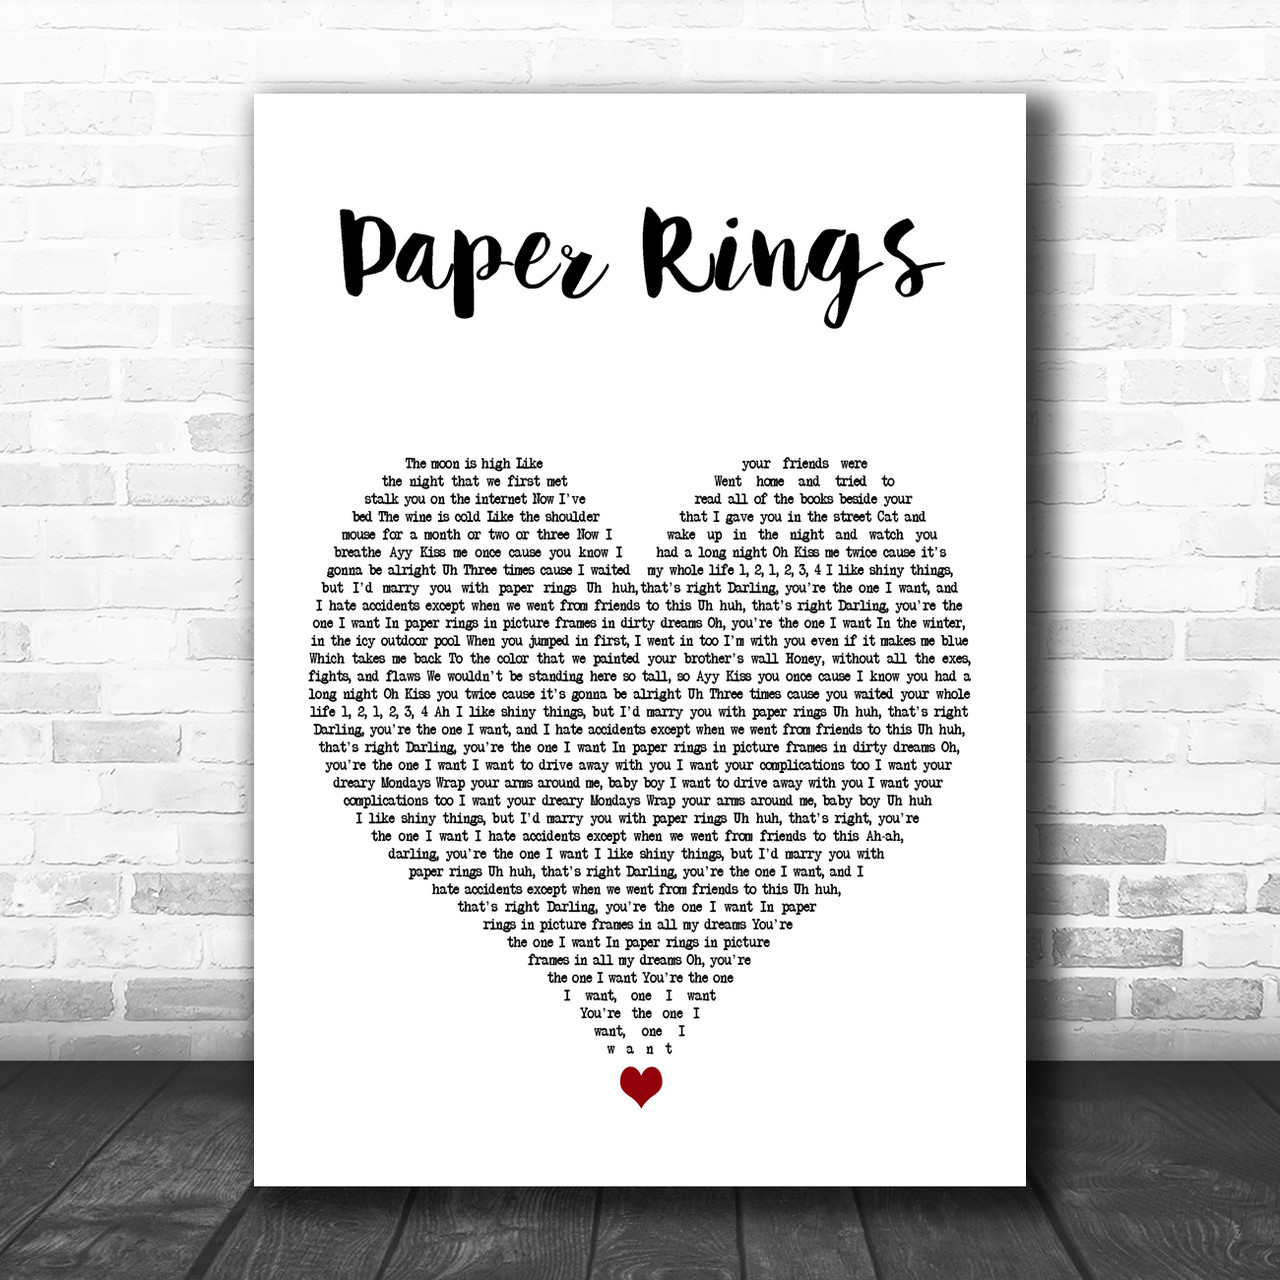 Amazon.com: JIAZH Taylor Lyrics Cover Swift Paper Rings Canvas Poster Wall  Art Decor Print Picture Paintings for Living Room Bedroom Decoration Frame:  Frame:20x30inch(50x75cm): Posters & Prints